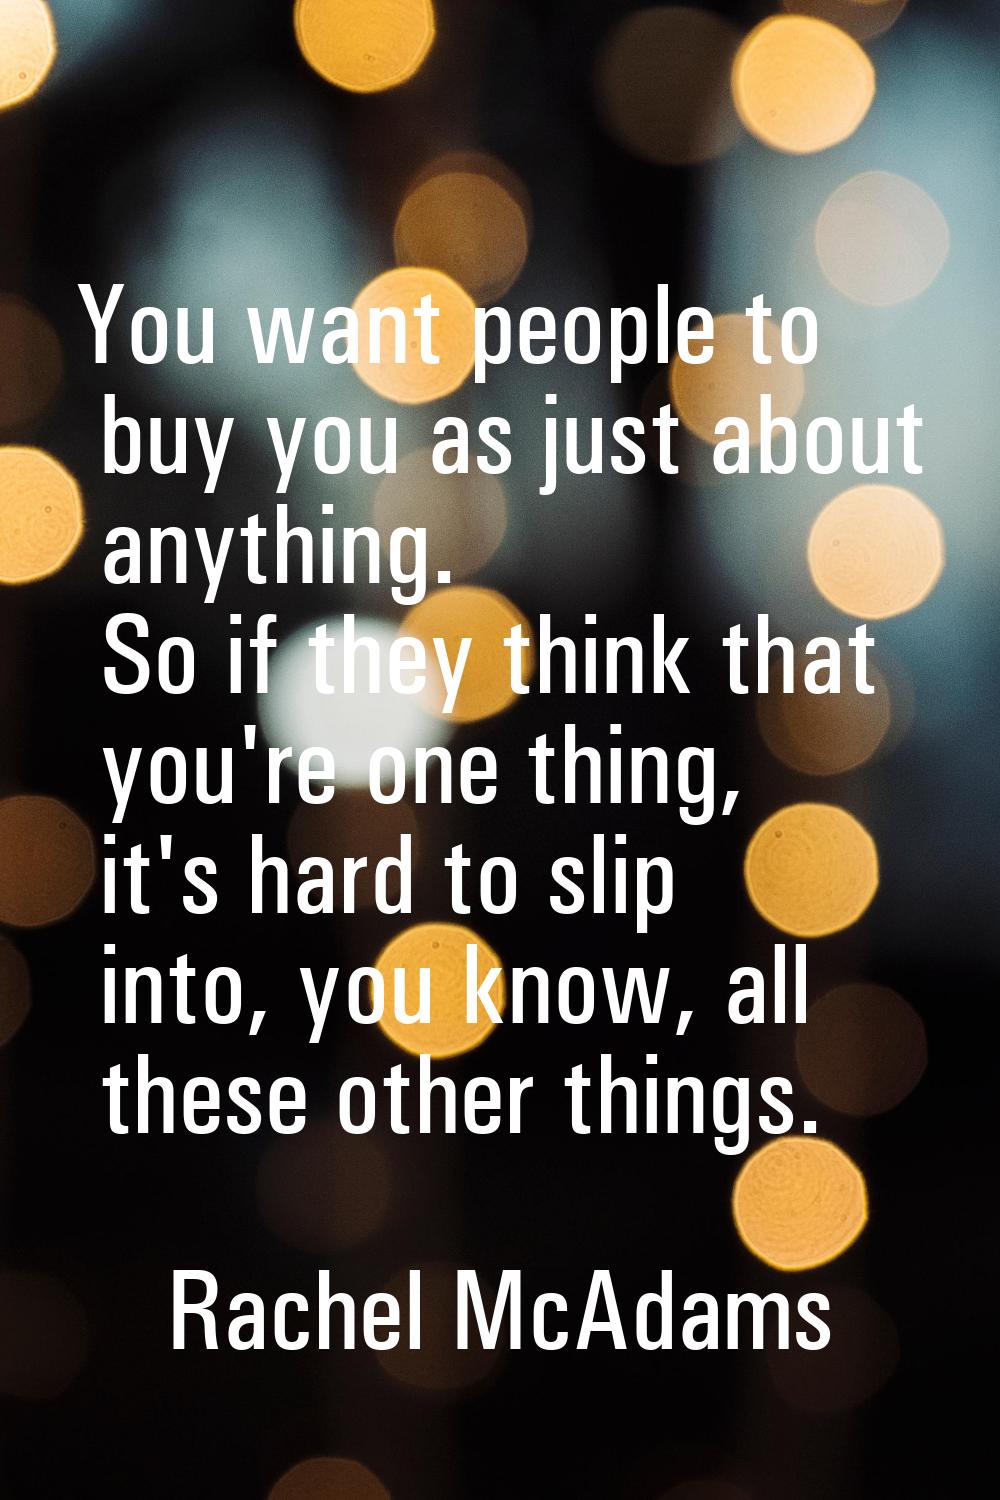 You want people to buy you as just about anything. So if they think that you're one thing, it's har